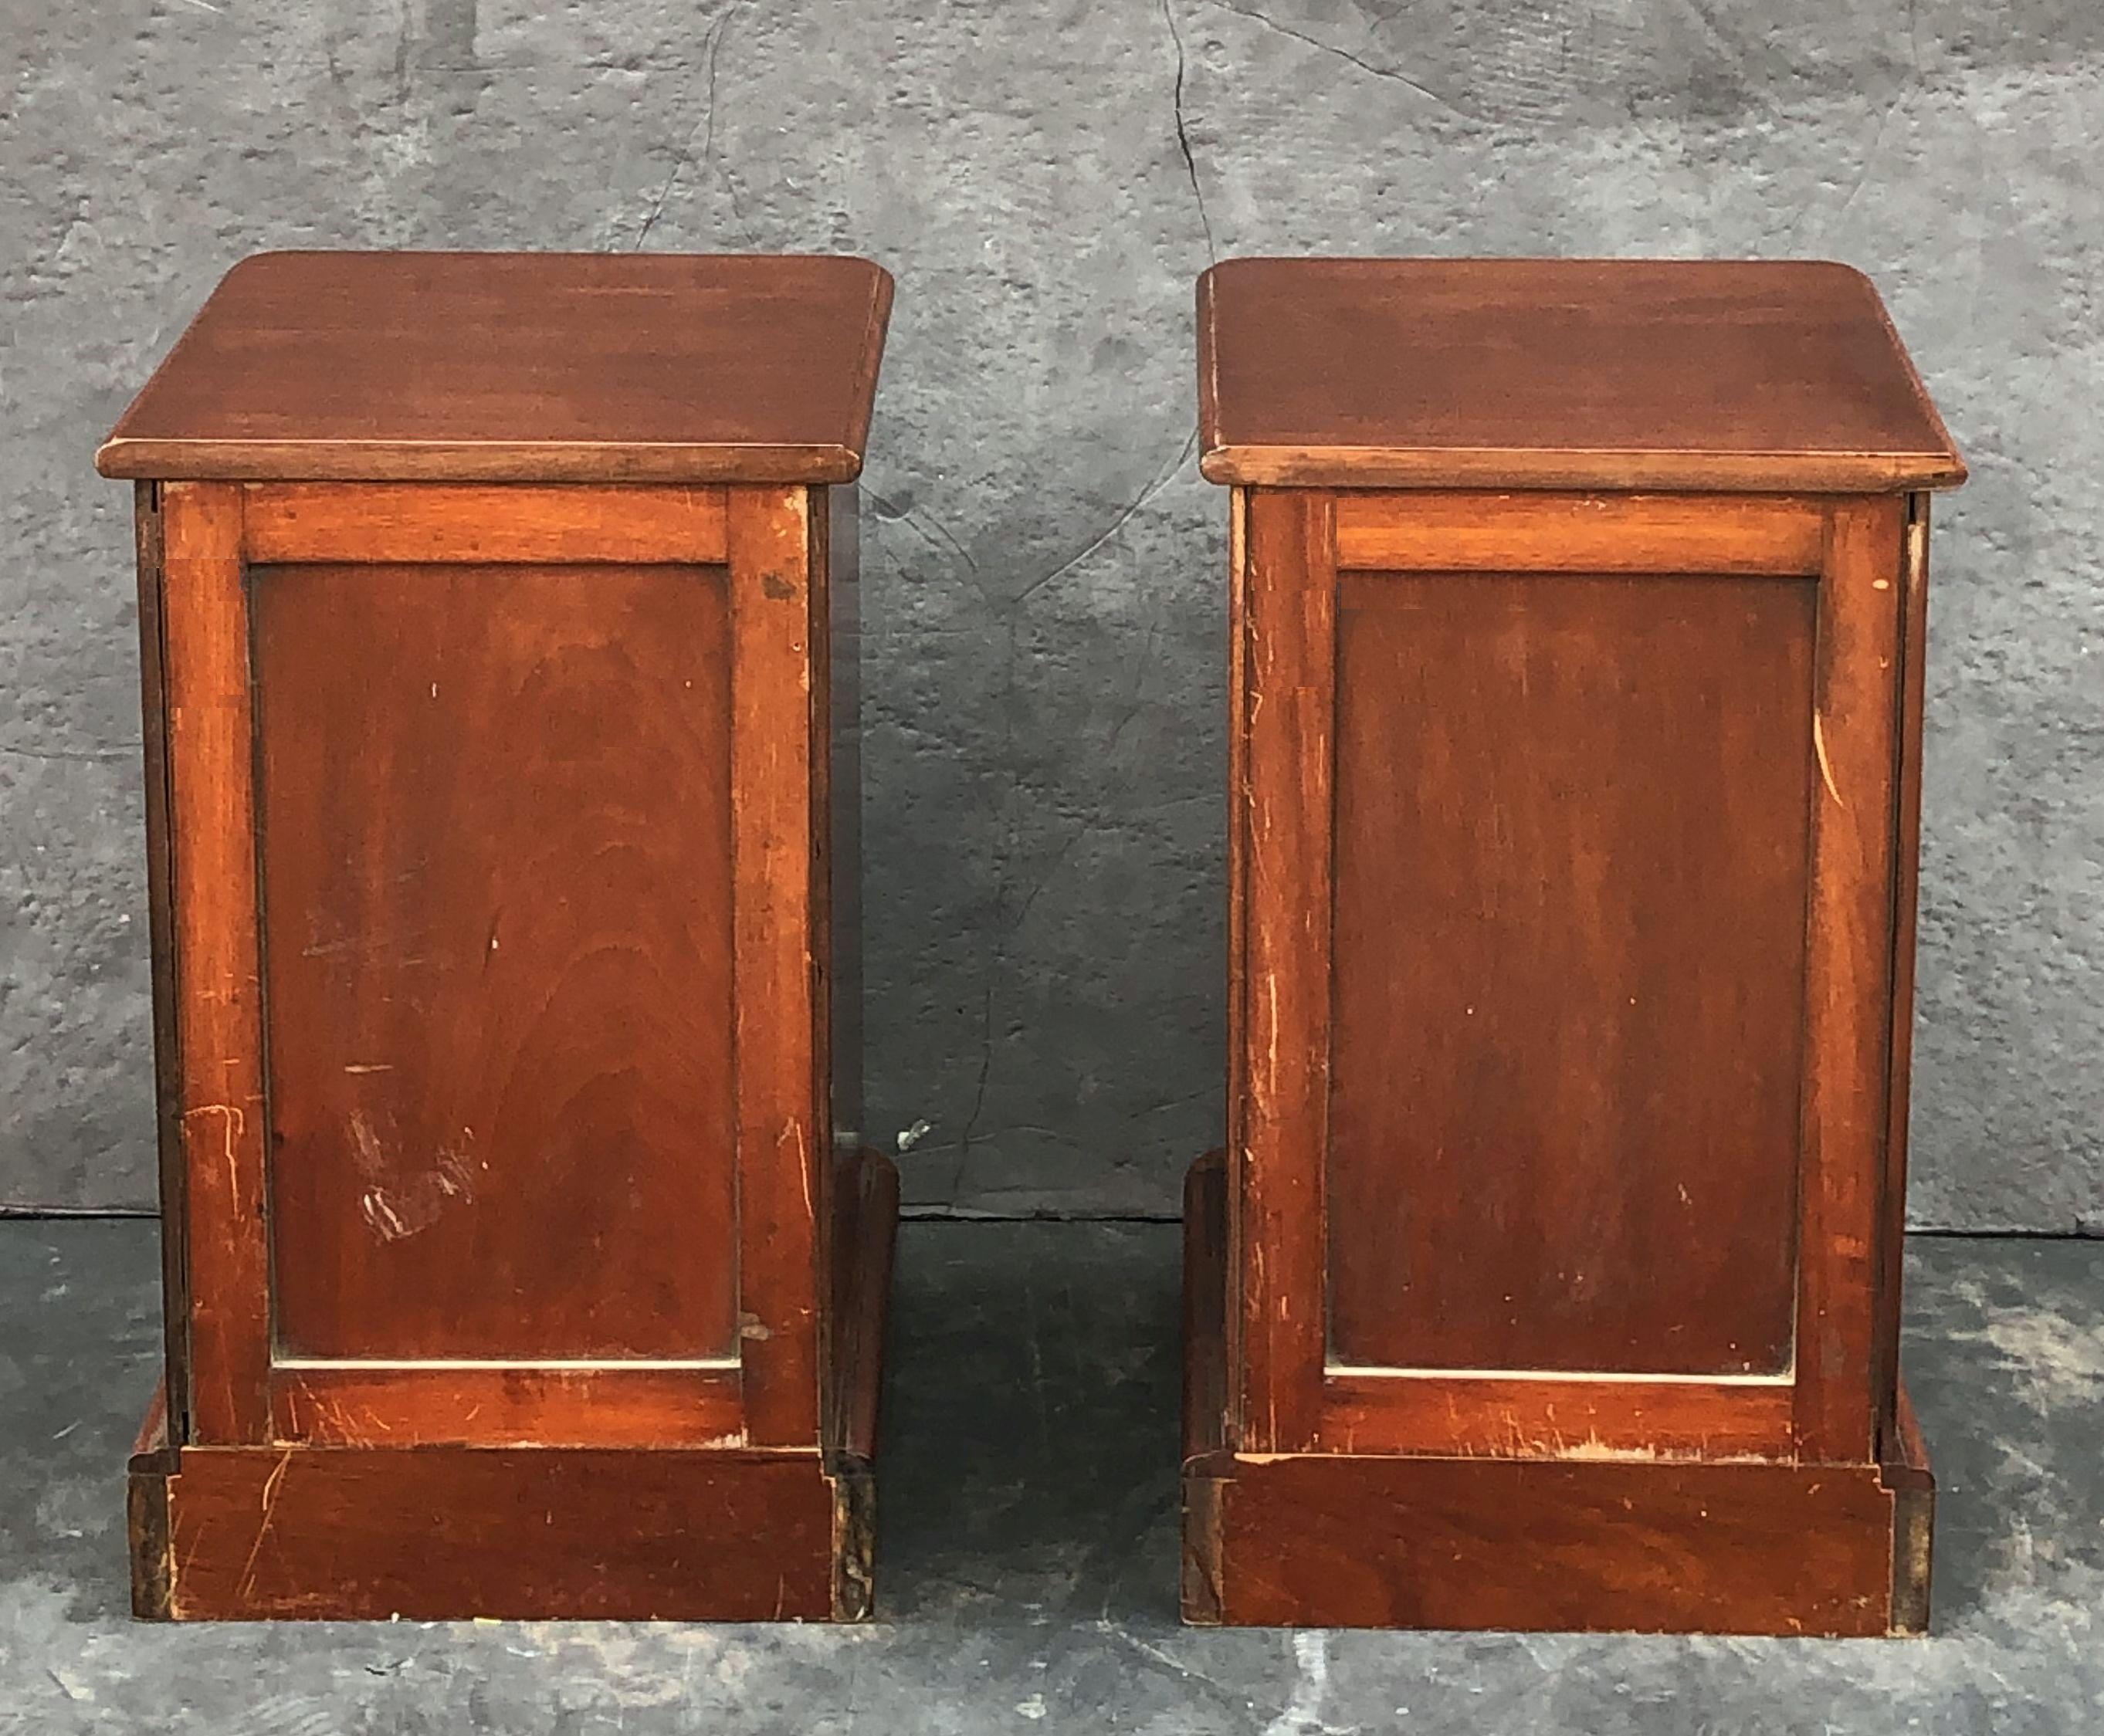 English Bedside Chests or Cabinet Nightstands of Mahogany, Priced as a Pair 15